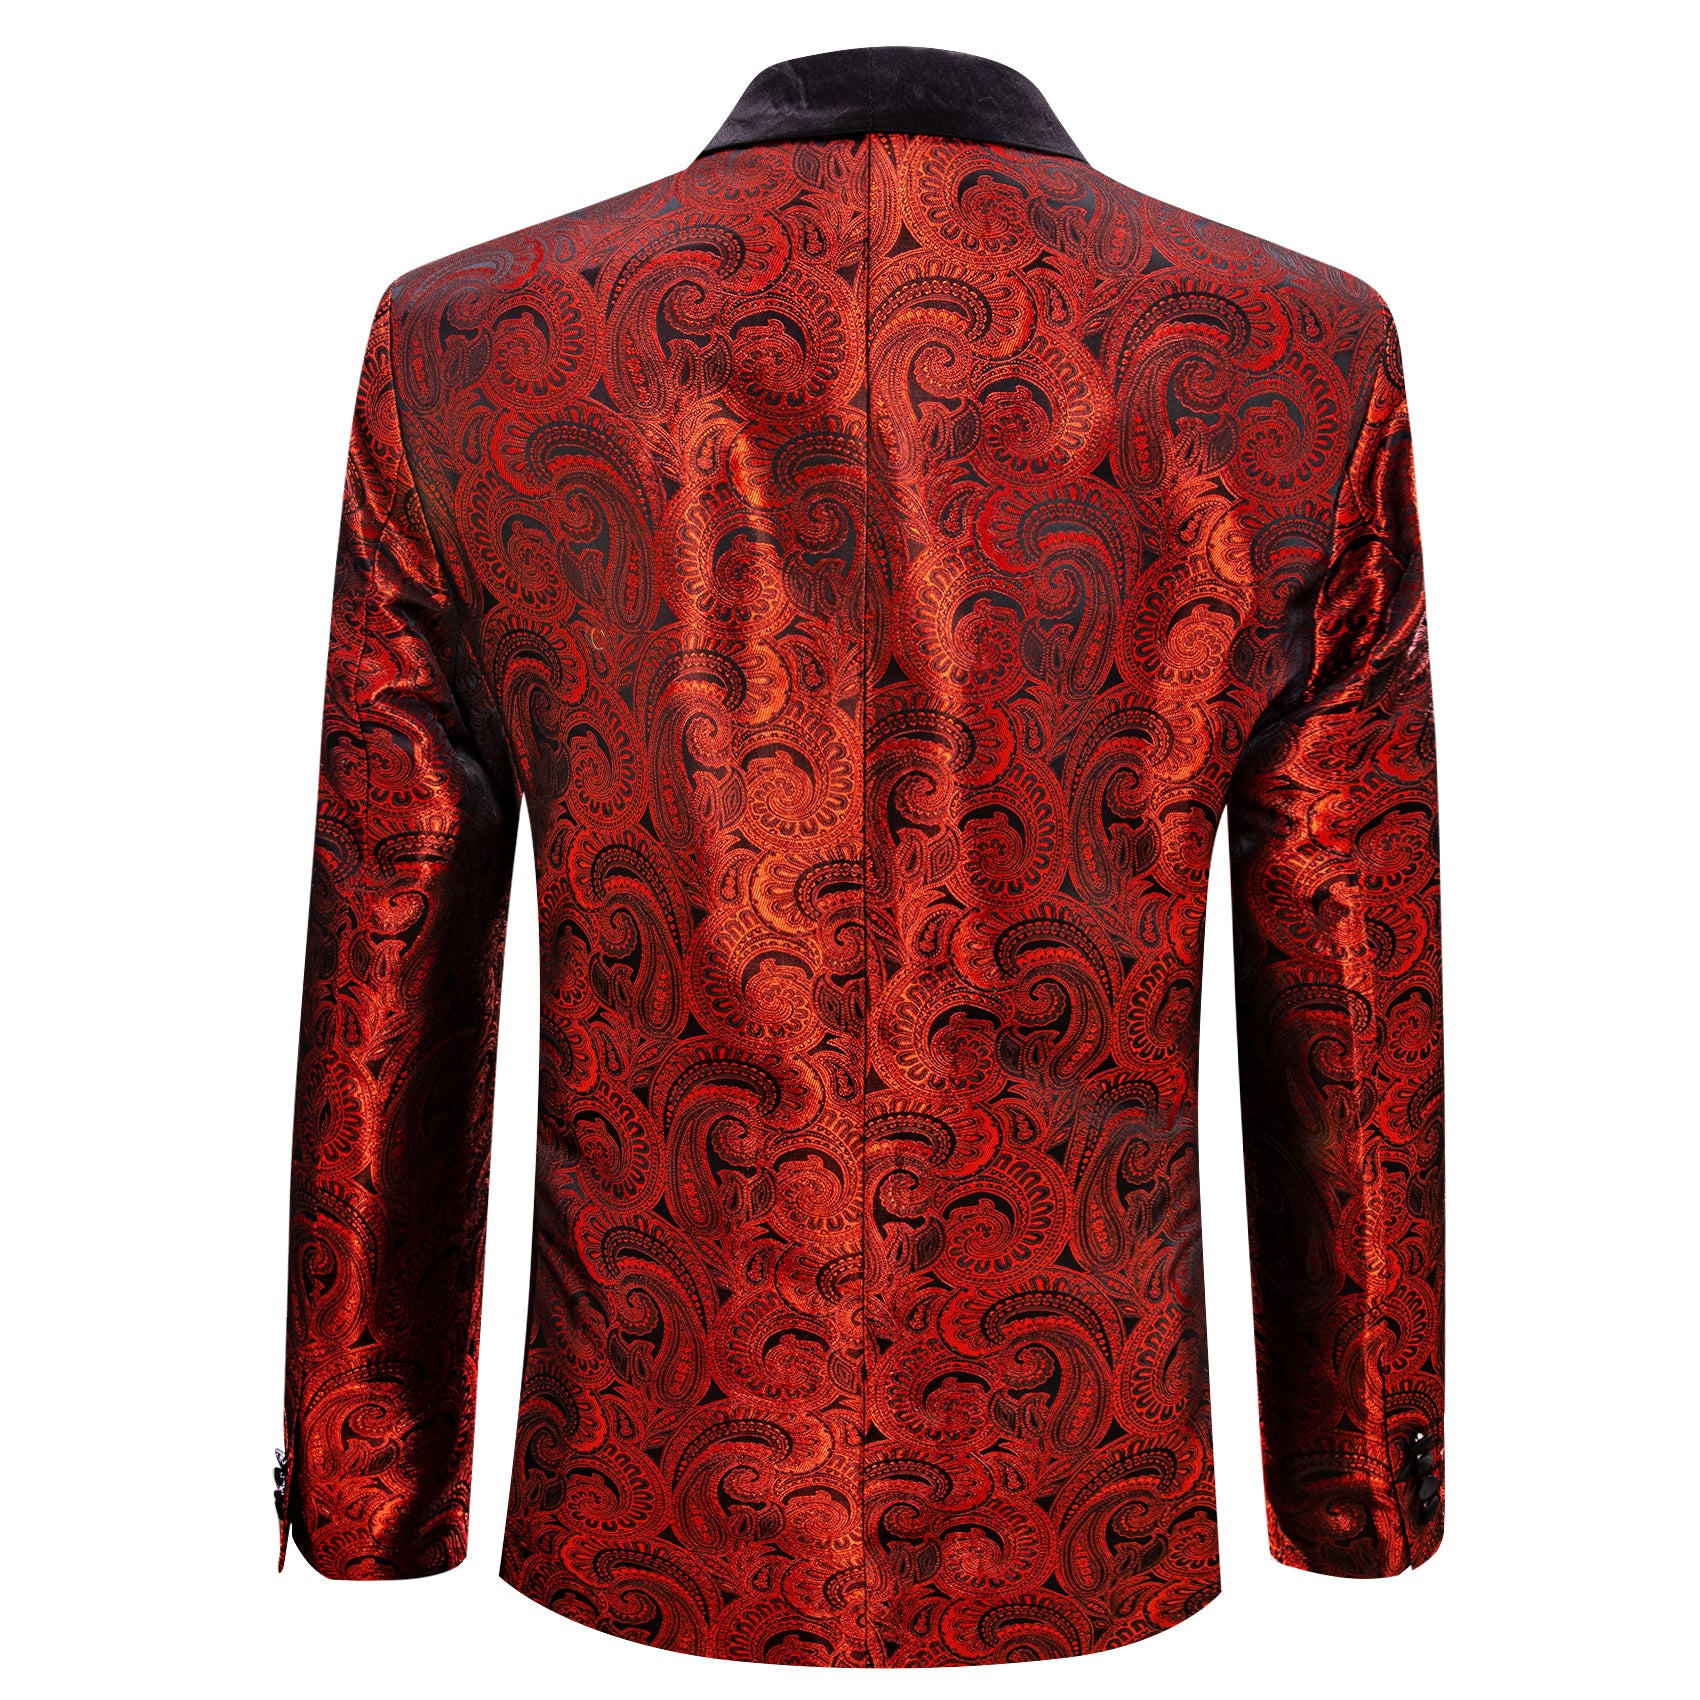 red paisley blazer for party